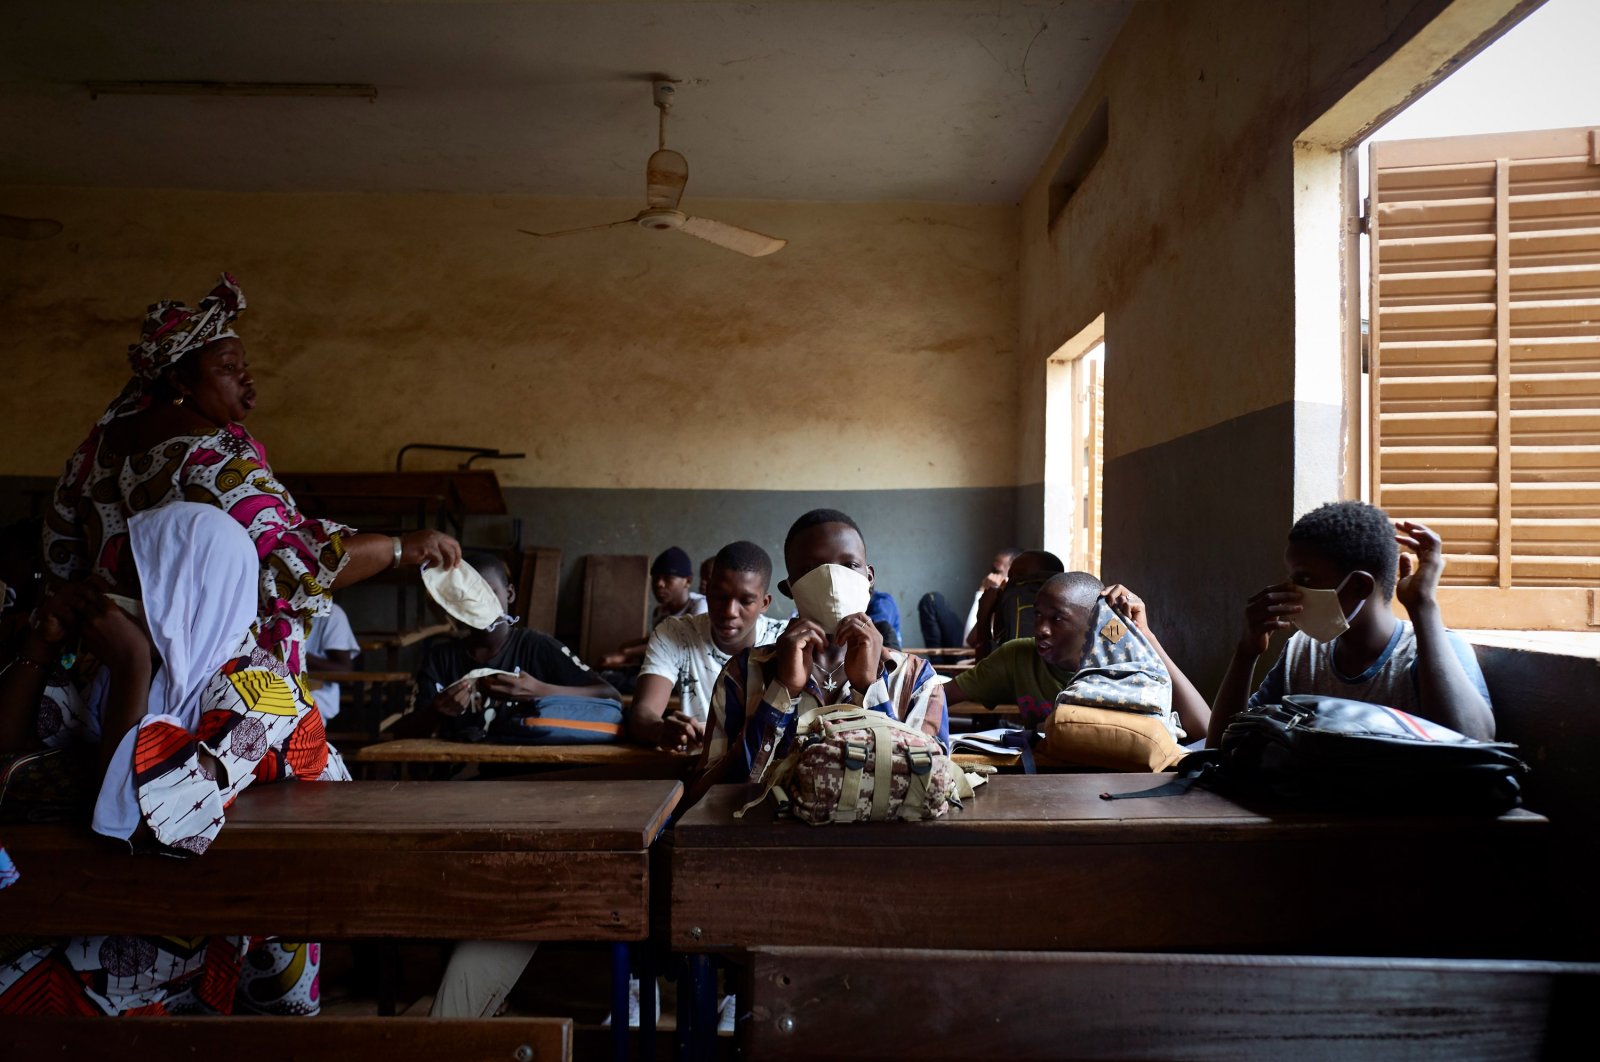 Malian students attend a lesson as the government decided to reopen the schools after two months of closure due to the spread of COVID-19 coronavirus, in Mali's capital Bamako, June 2, 2020. (AFP Photo)